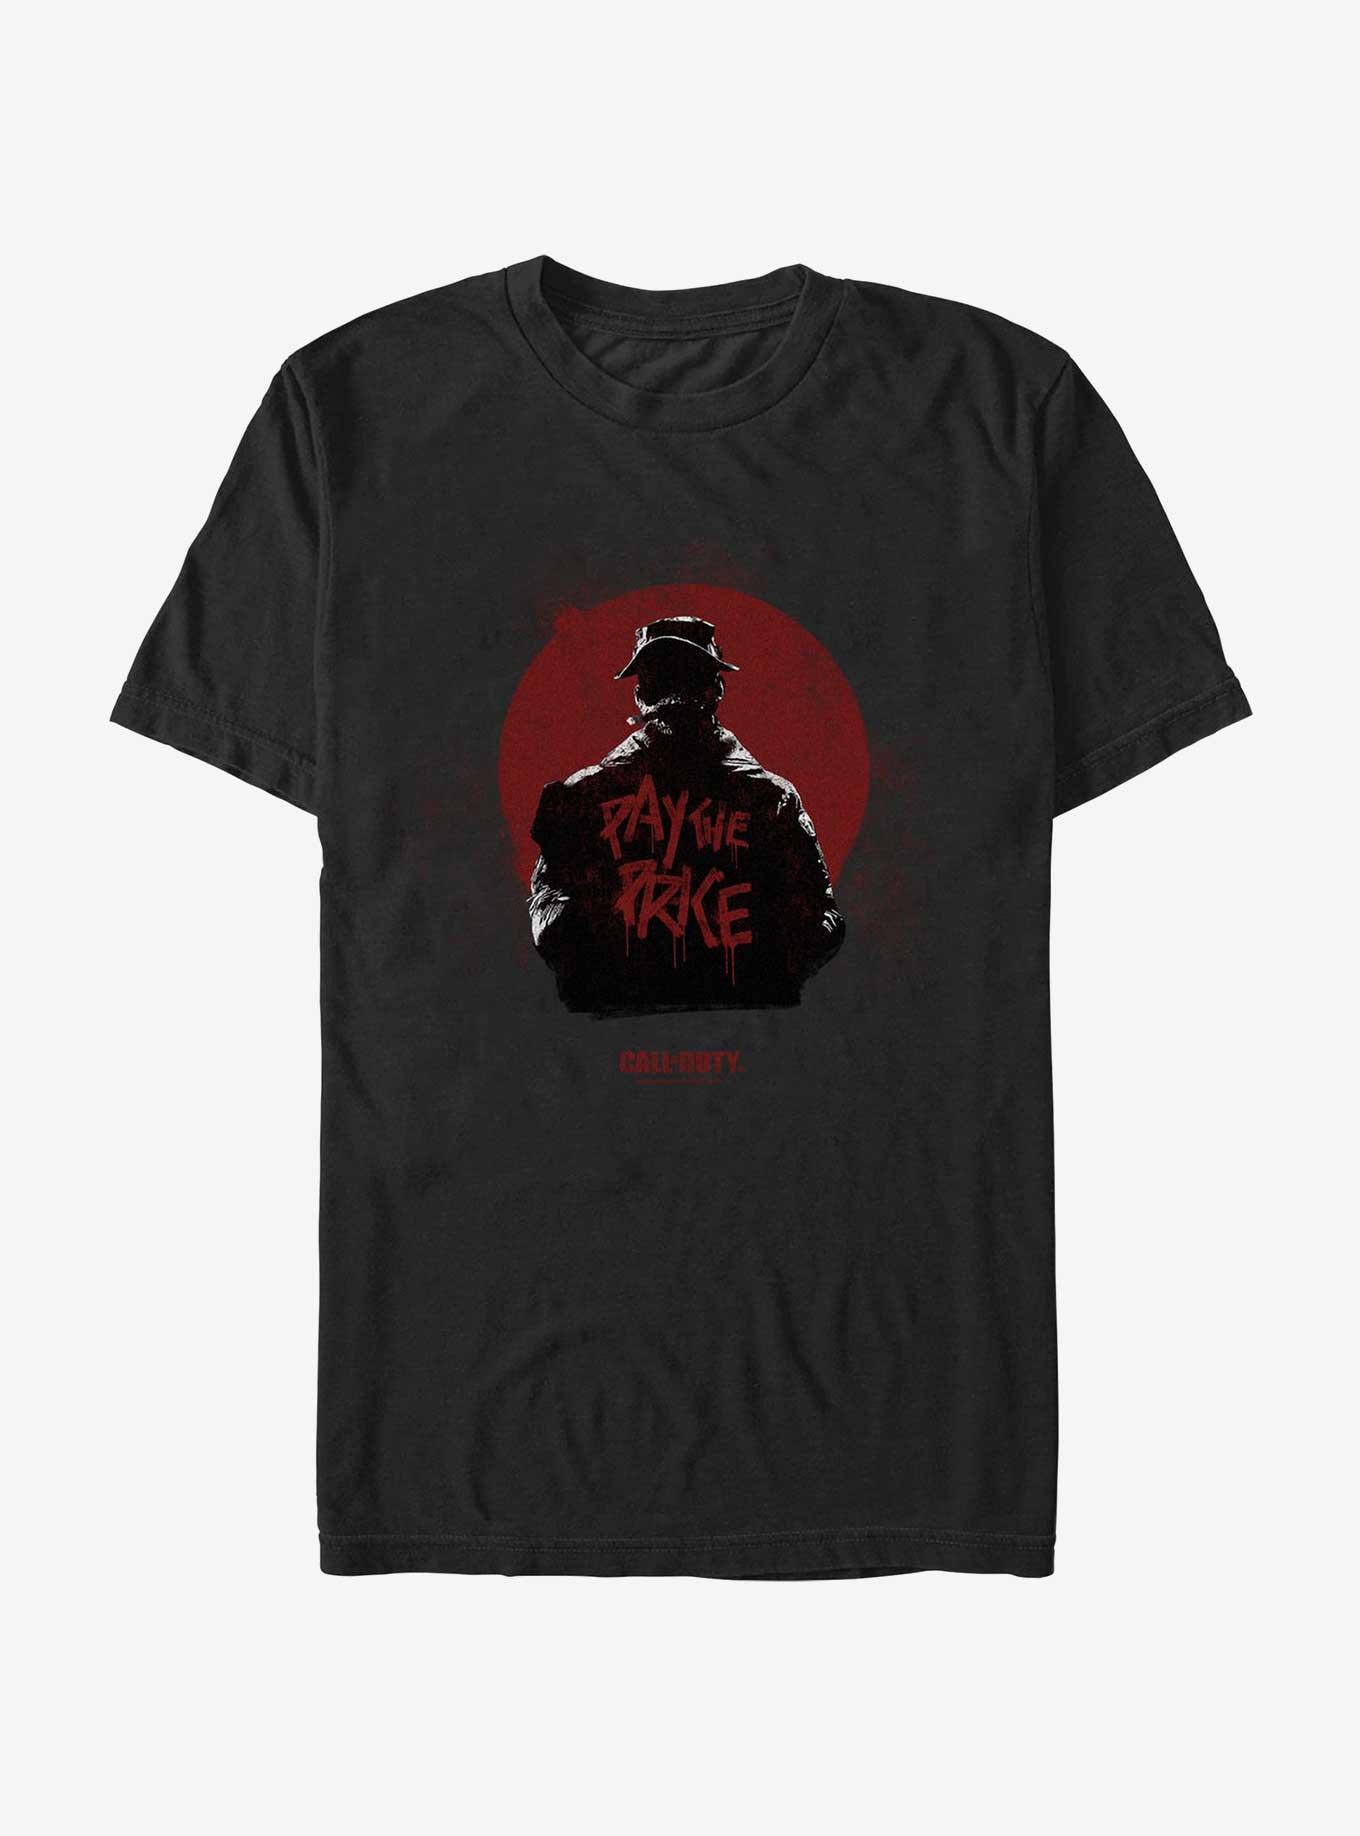 Call of Duty Blood Moon Pay The Price T-Shirt, BLACK, hi-res